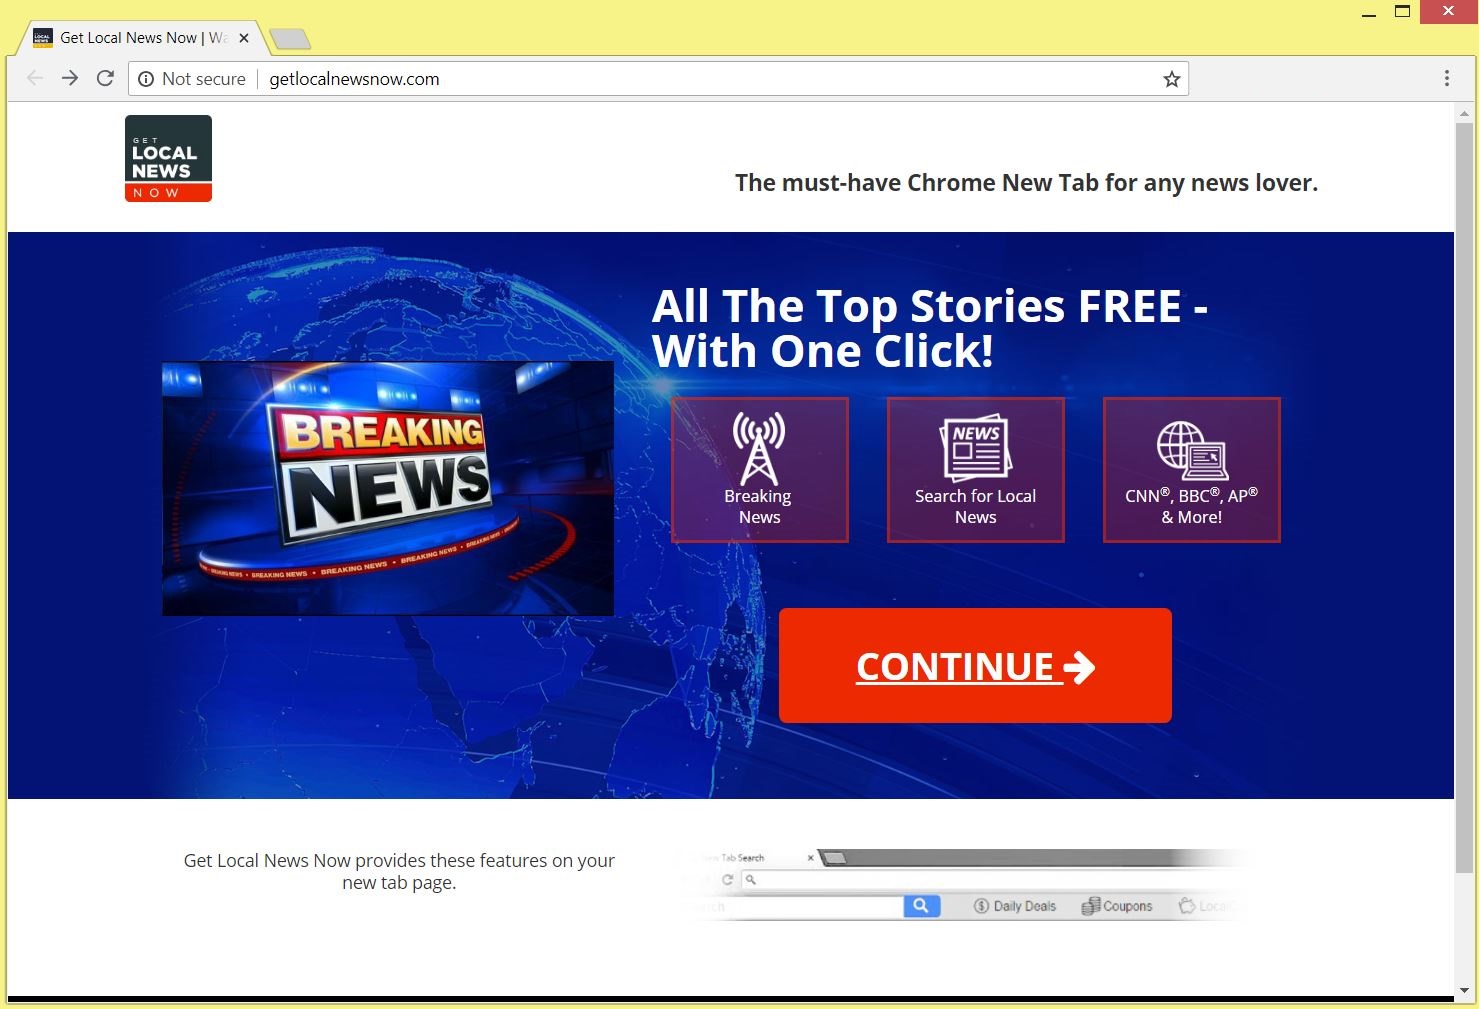 getlocalnewsnow.com website redirects to headlinealley extension download page